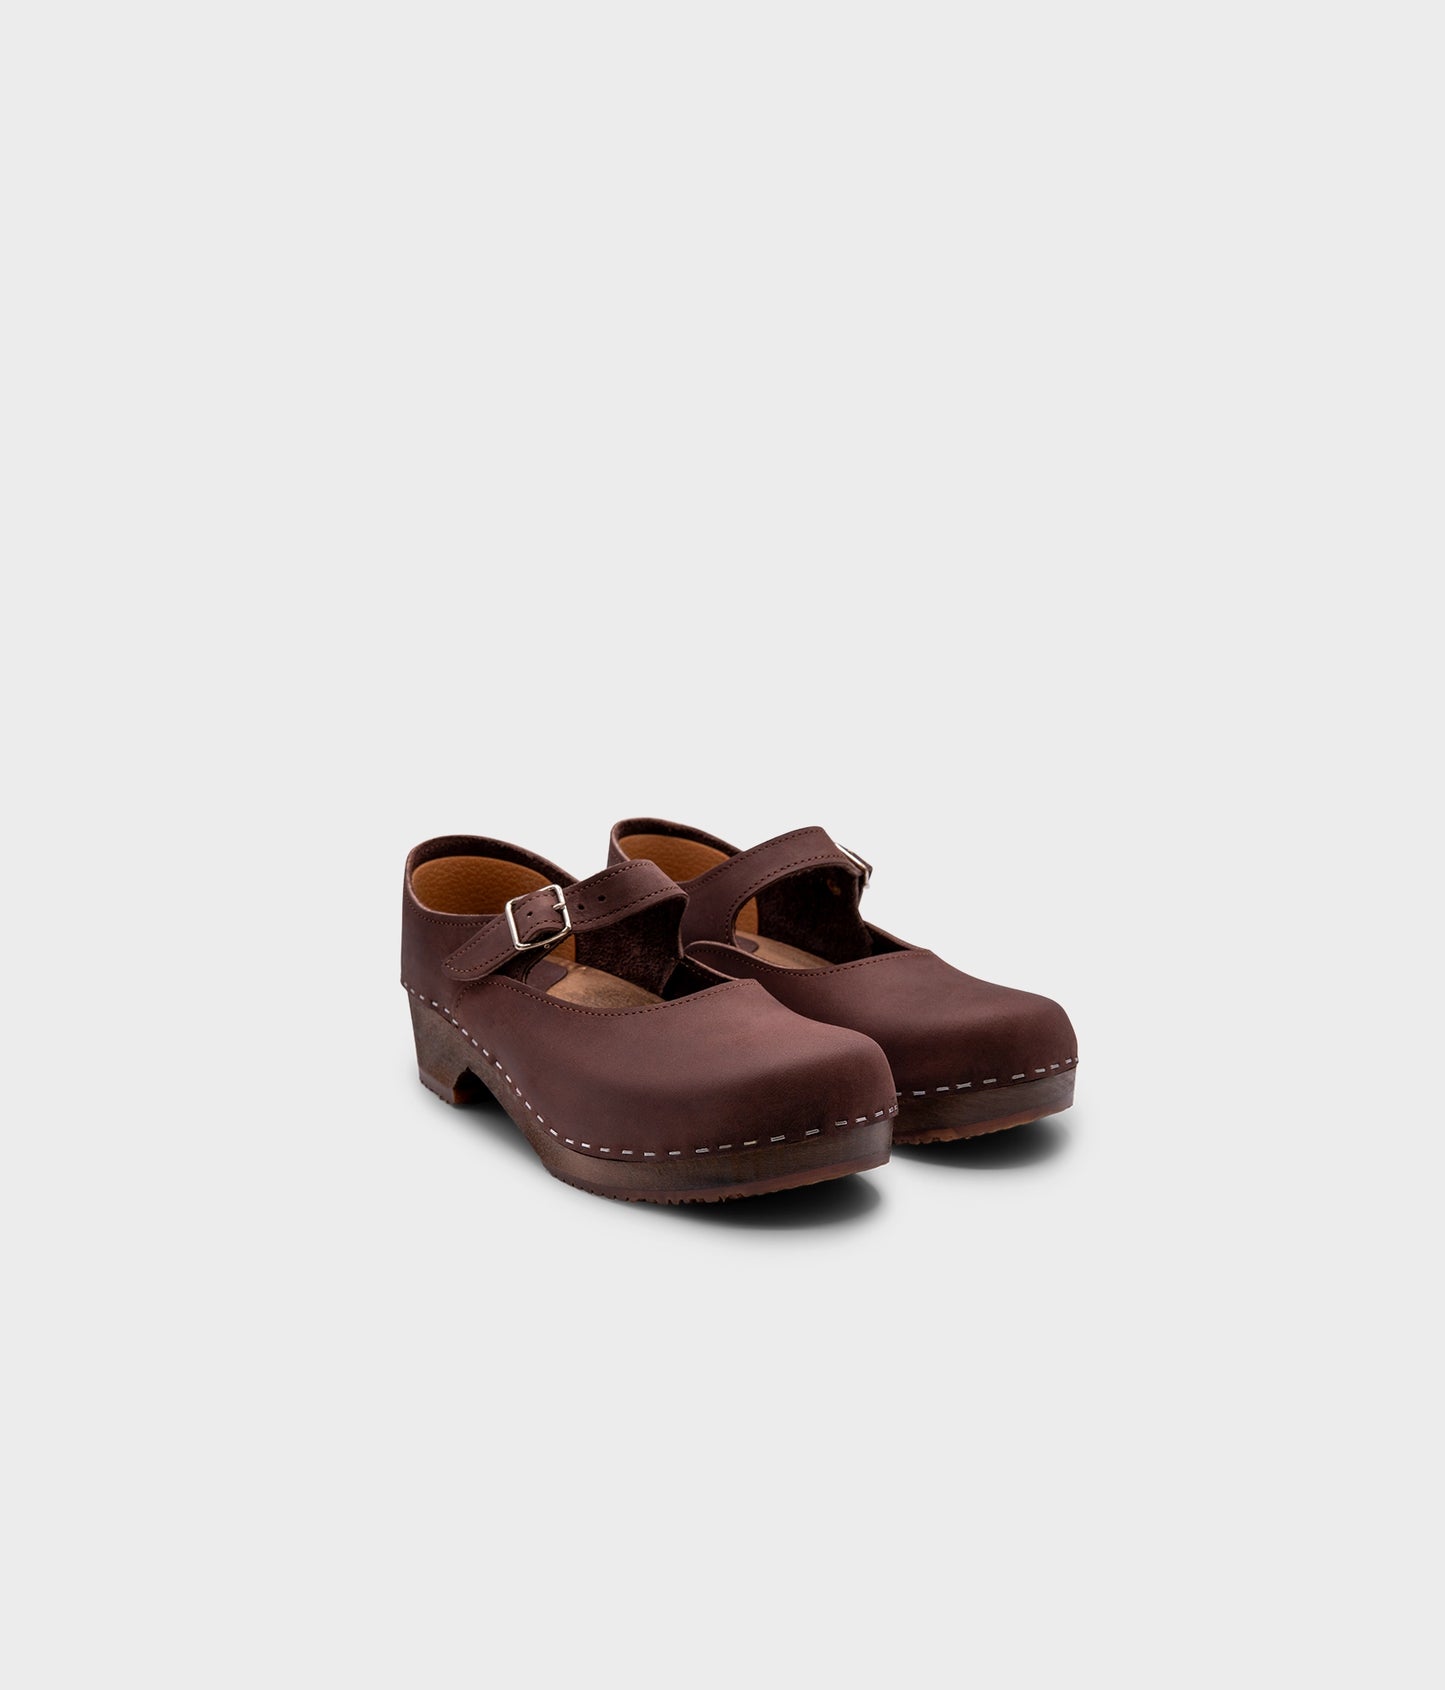 Mary Jane wooden clogs in dark brown nubuck leather stapled on a dark wooden base